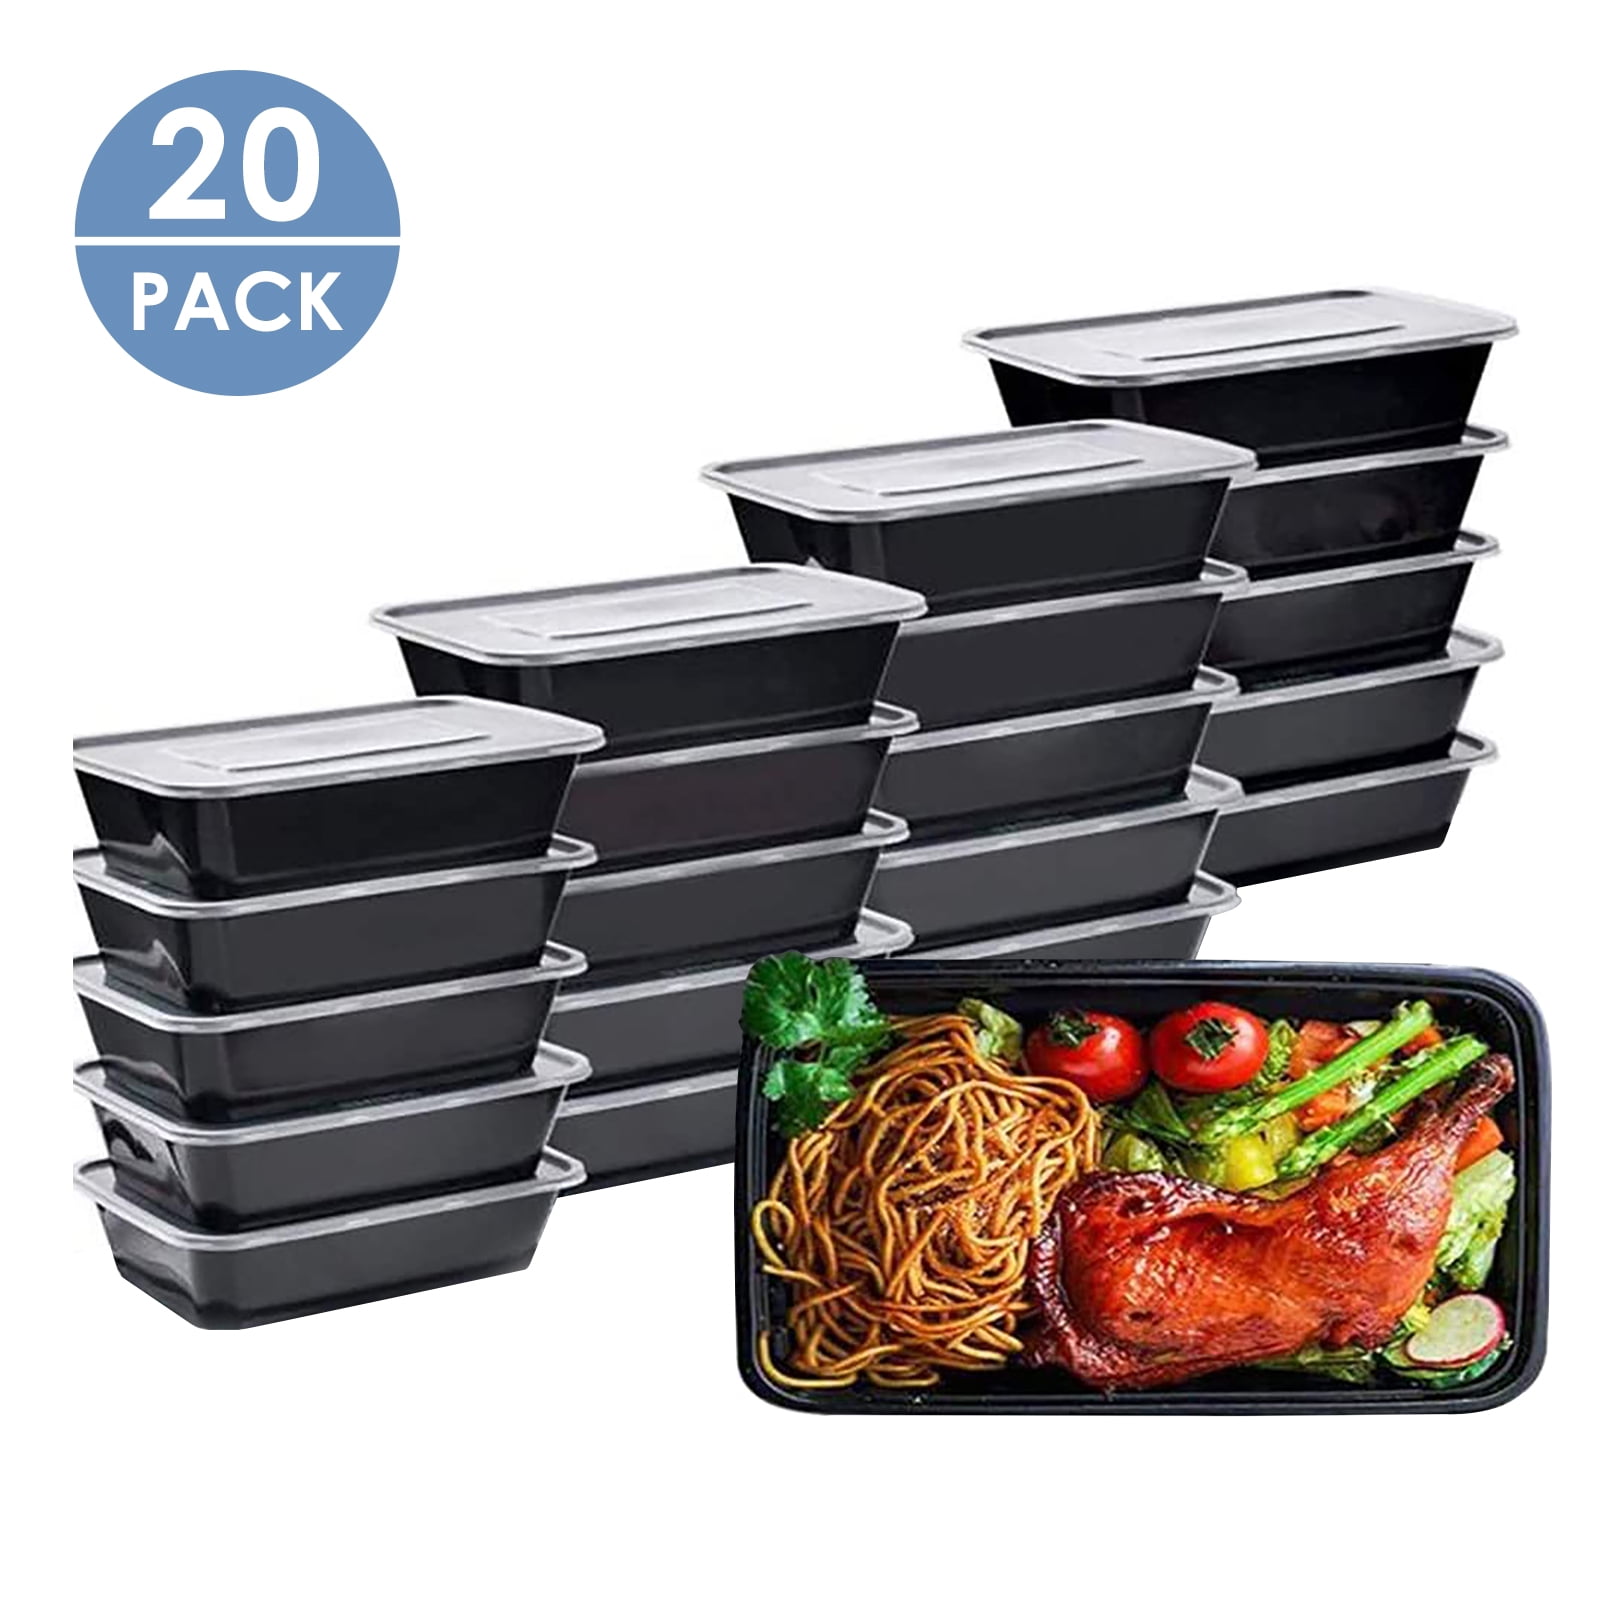 Meal Prep Container 1 Compartment - 20 Pack Extra-Thick Food Storage  Containers w/ Lids Plastic Bent…See more Meal Prep Container 1 Compartment  - 20